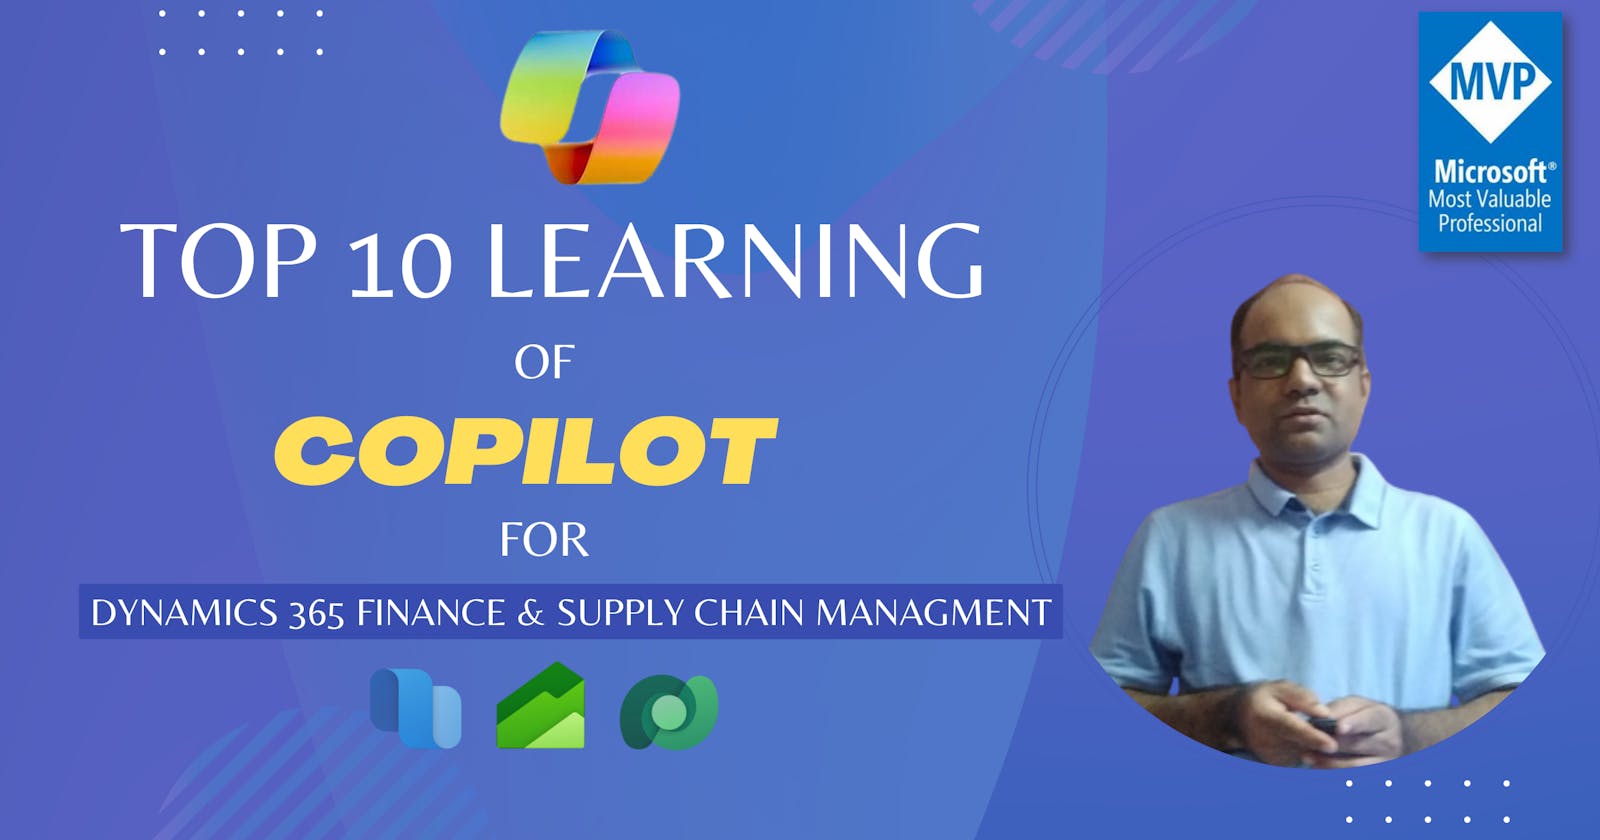 My Top 10 Learning of Copilot for Dynamics 365 Finance & Supply Chain Management